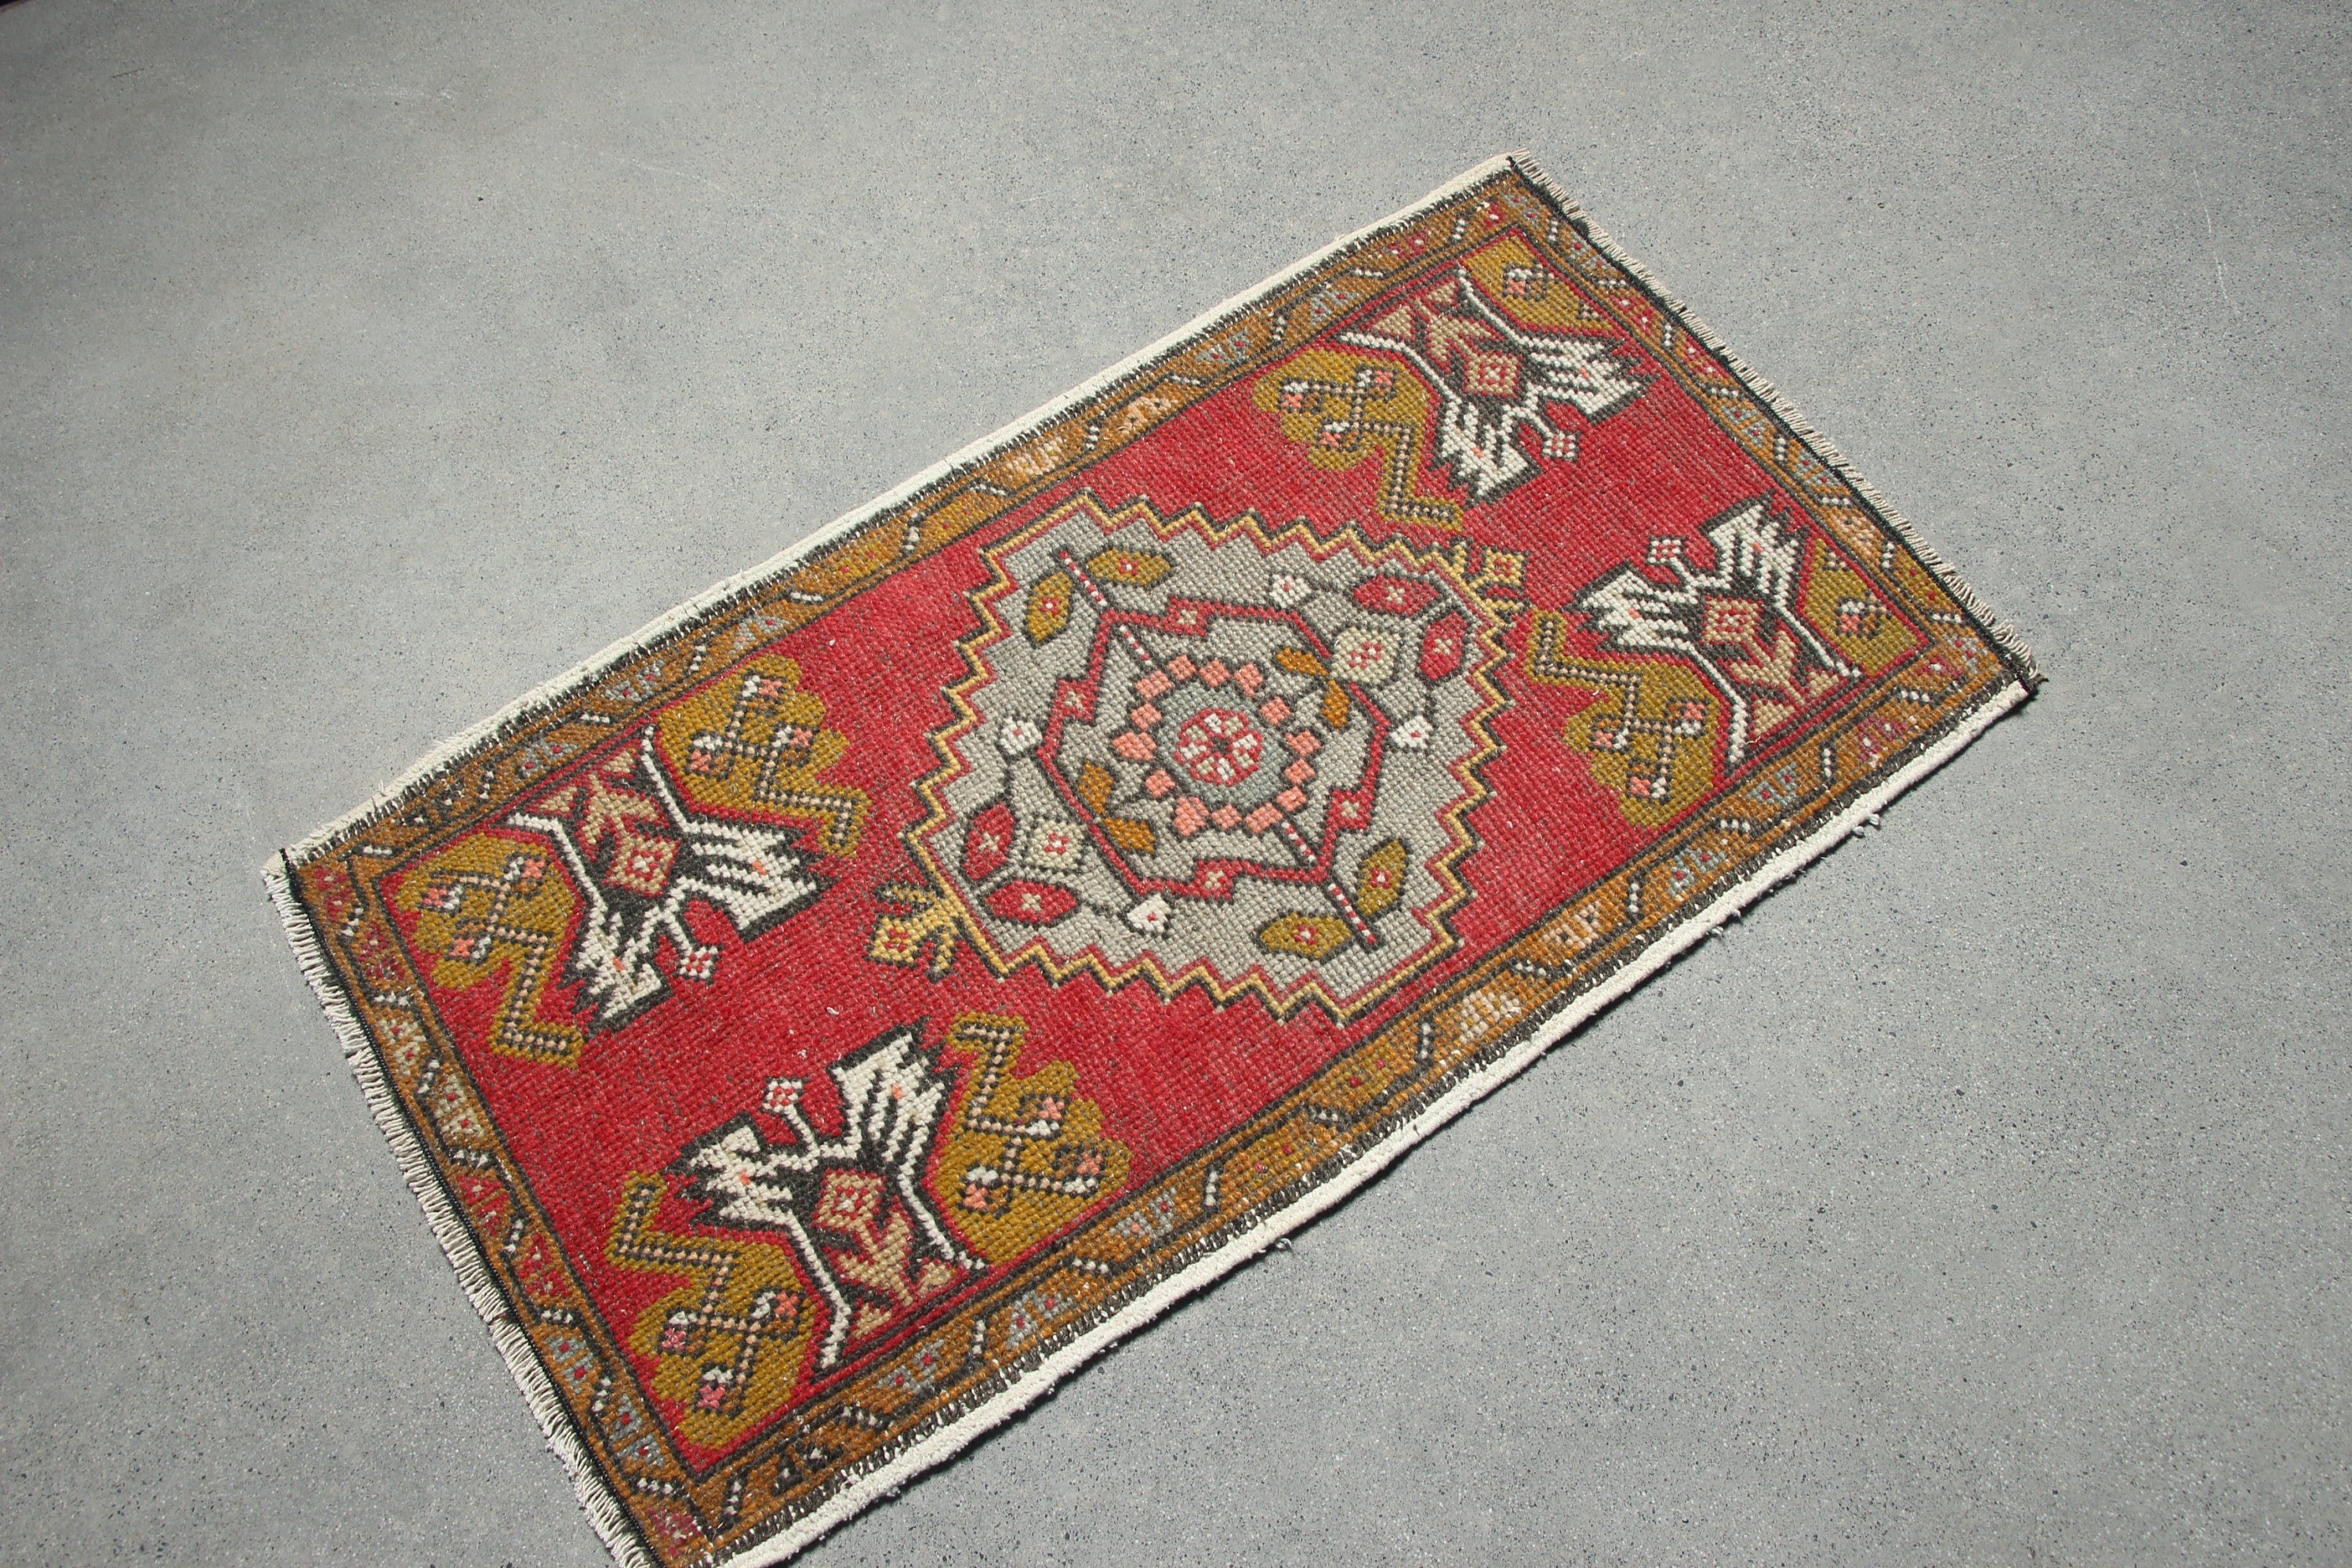 Red Moroccan Rugs, Bathroom Rugs, Tribal Rug, Turkish Rugs, Vintage Rug, Antique Rug, Rugs for Bathroom, 1.9x3.3 ft Small Rug, Kitchen Rug